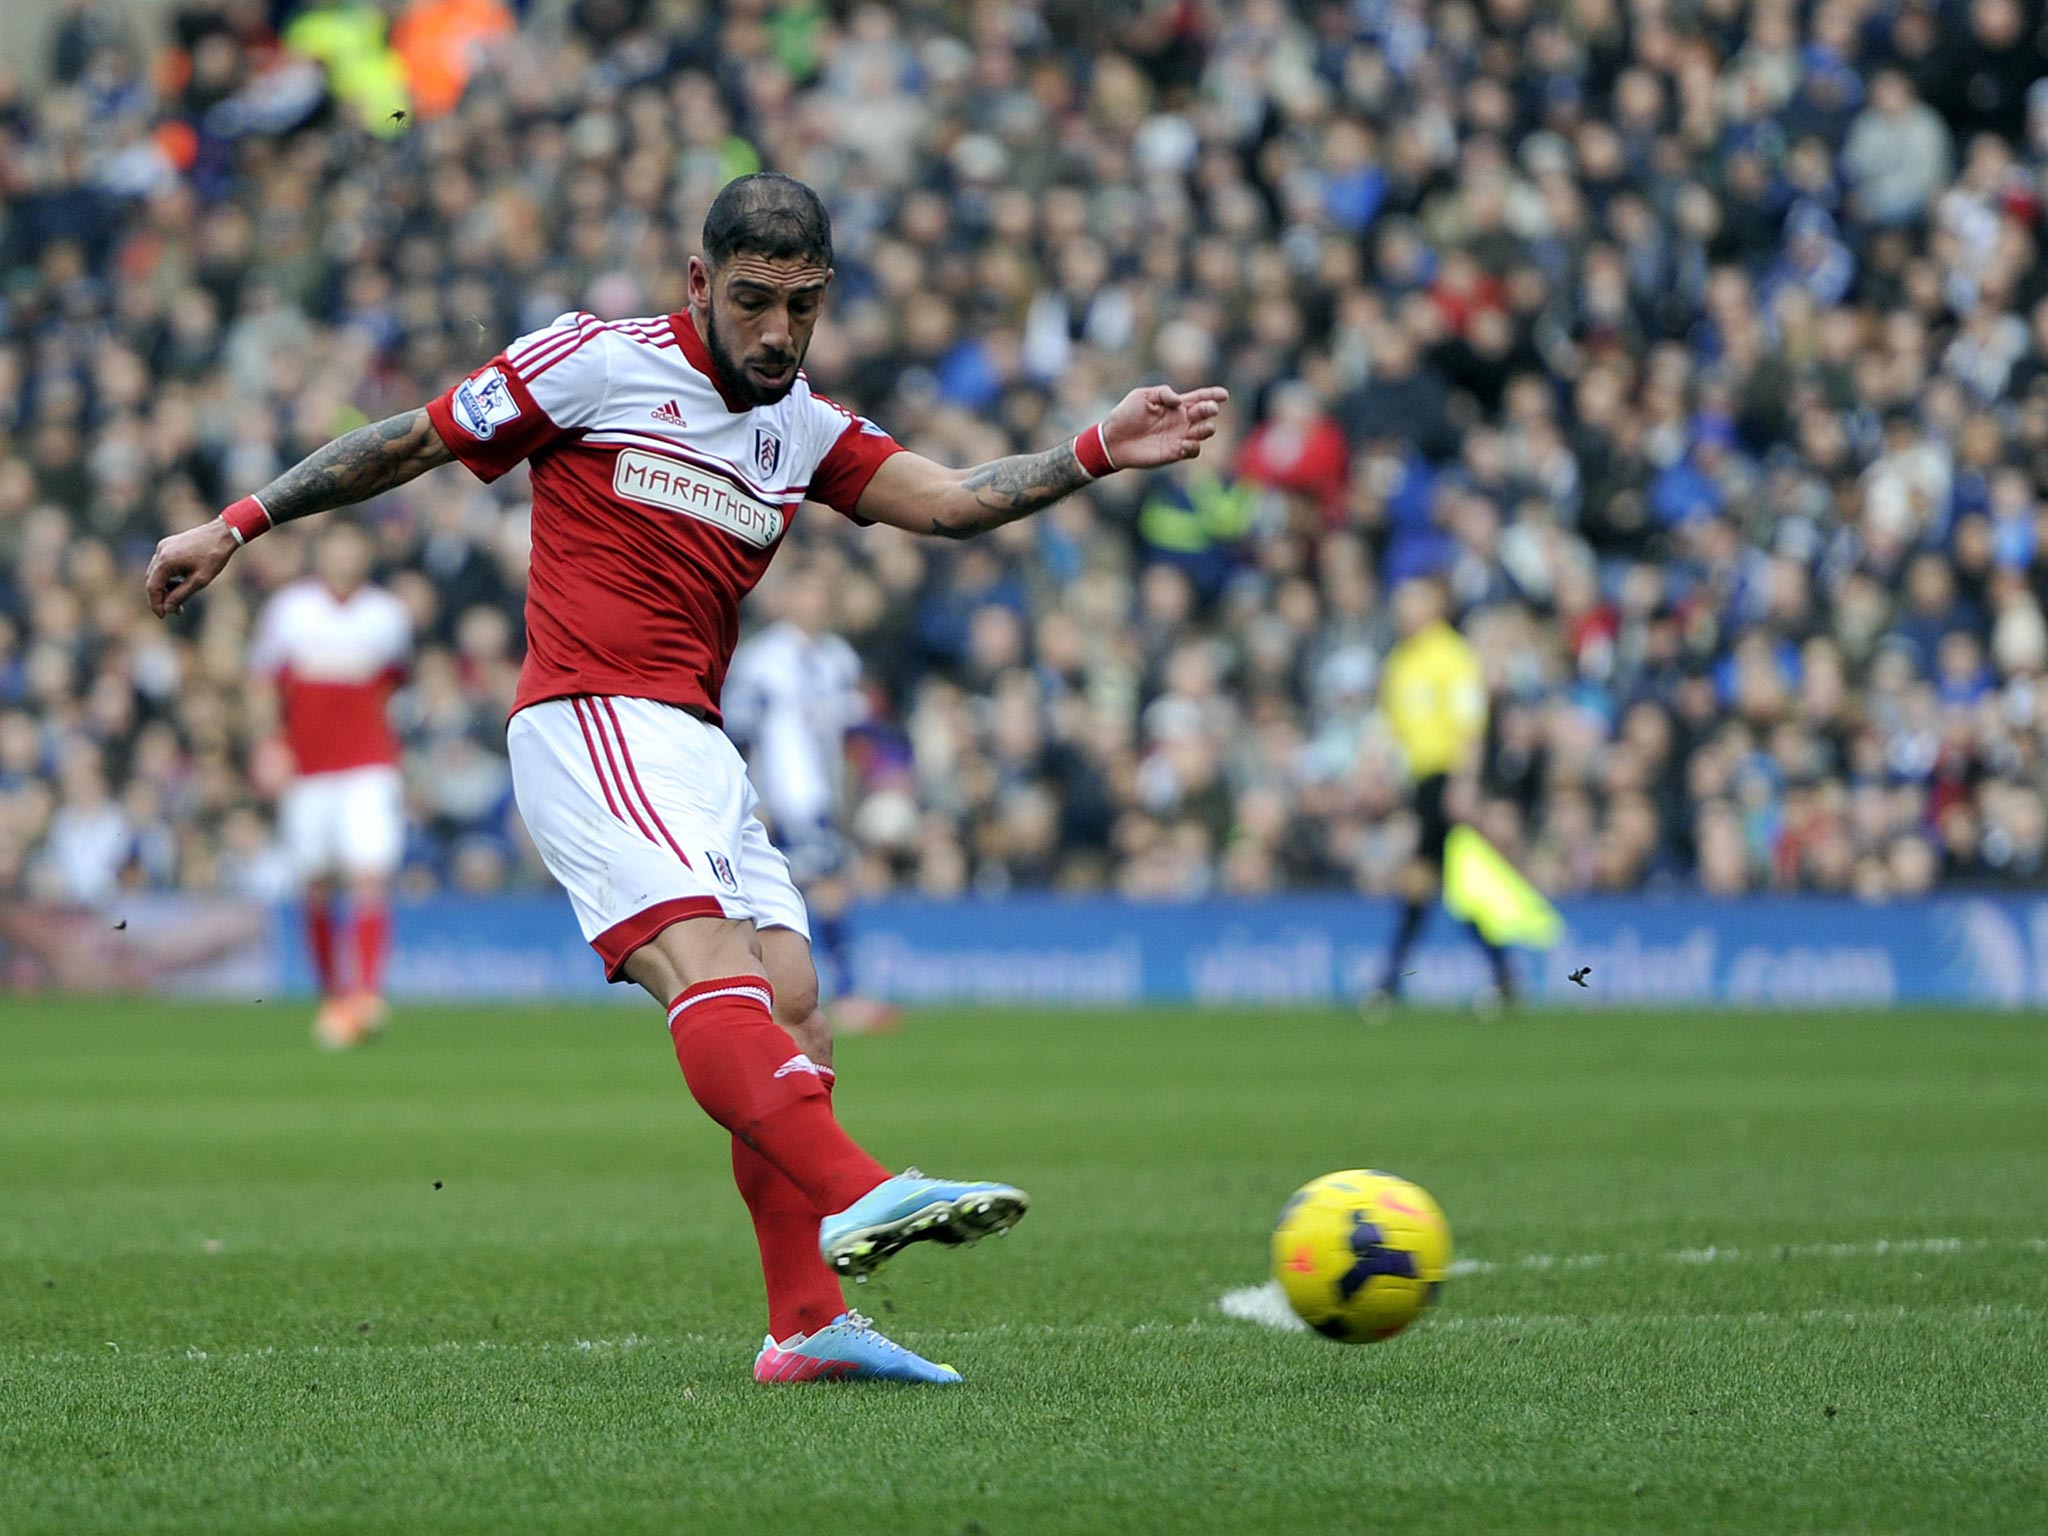 Ashkan Dejagah scores during Fulham’s draw at West Bromwich
in Felix Magath’s first match as manager